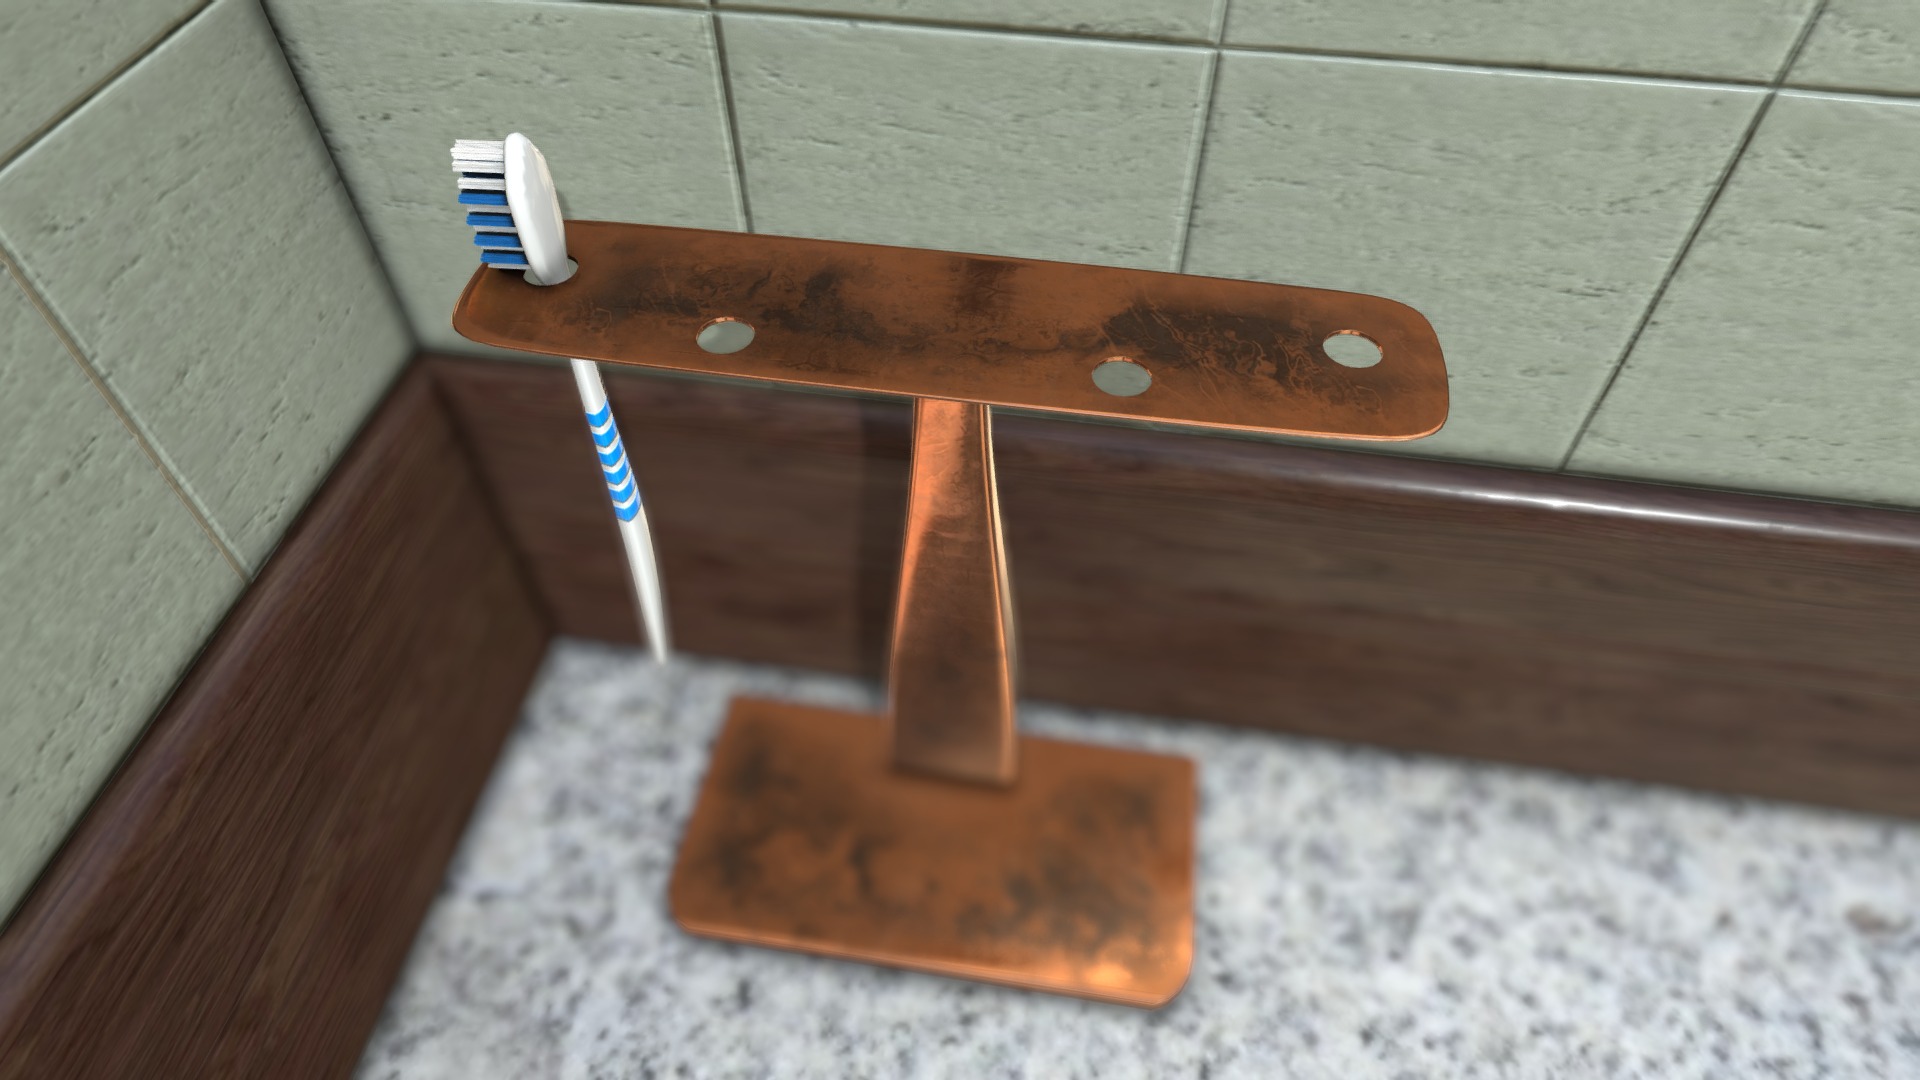 3D model Toothbrush and Brass Toothbrush Holder. - This is a 3D model of the Toothbrush and Brass Toothbrush Holder.. The 3D model is about a wooden hammer on a wooden surface.